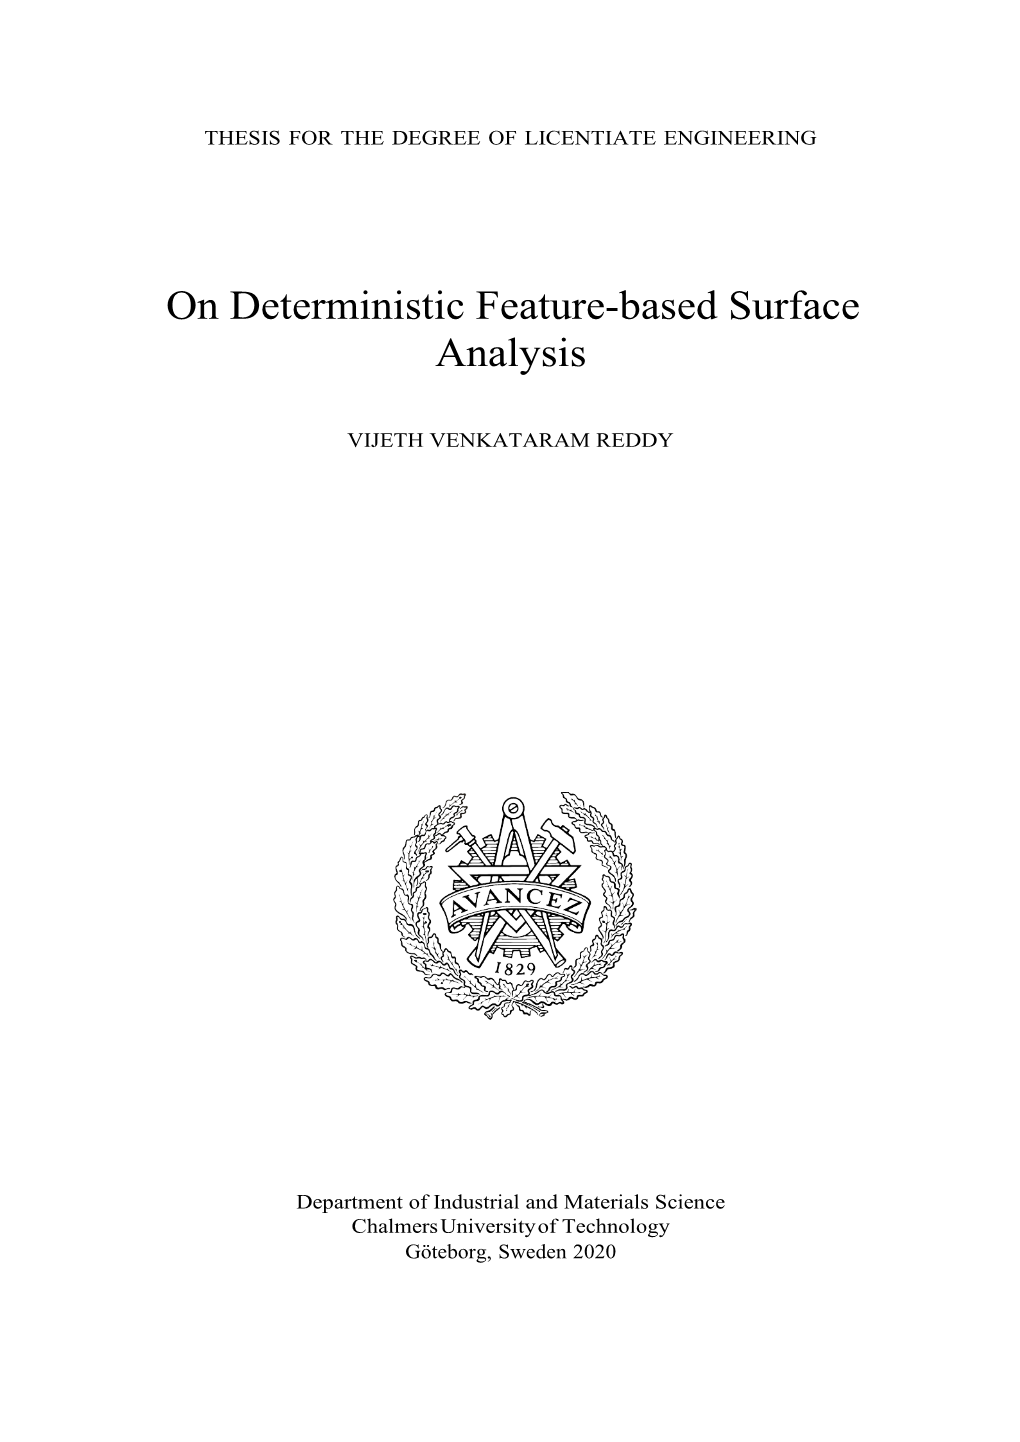 On Deterministic Feature-Based Surface Analysis